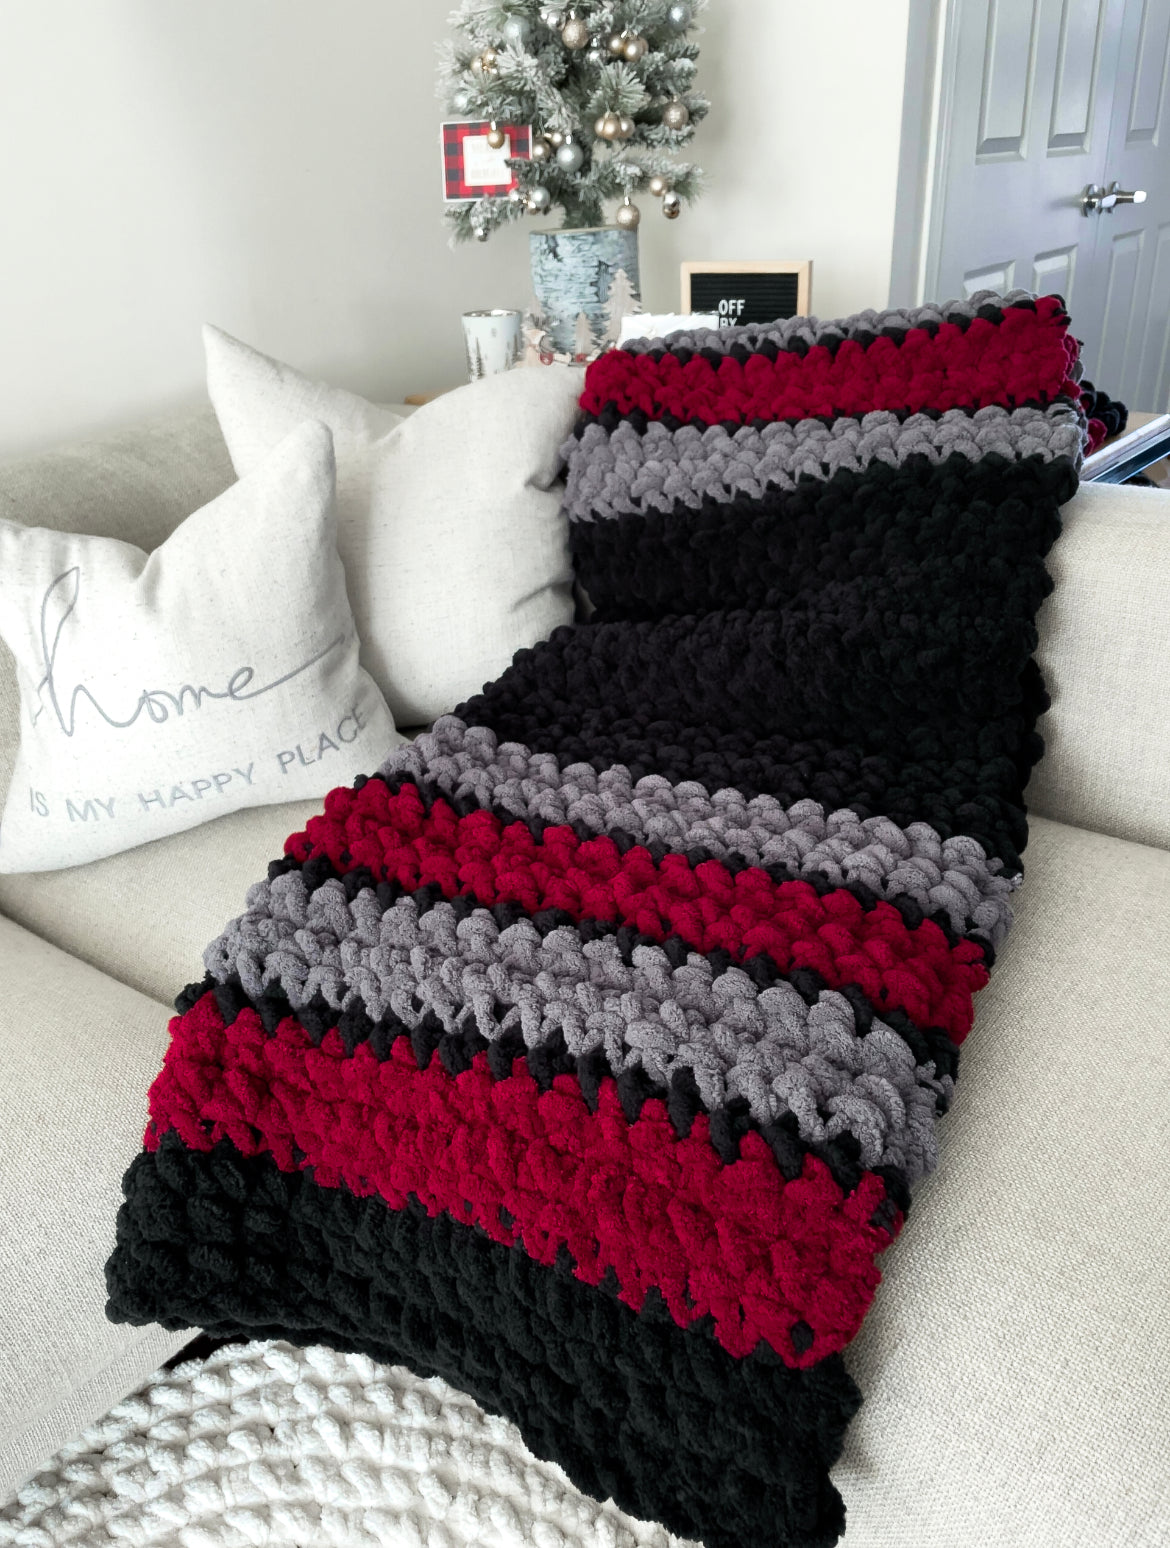 Healing Hand, Chunky Knit Blankets The Travis